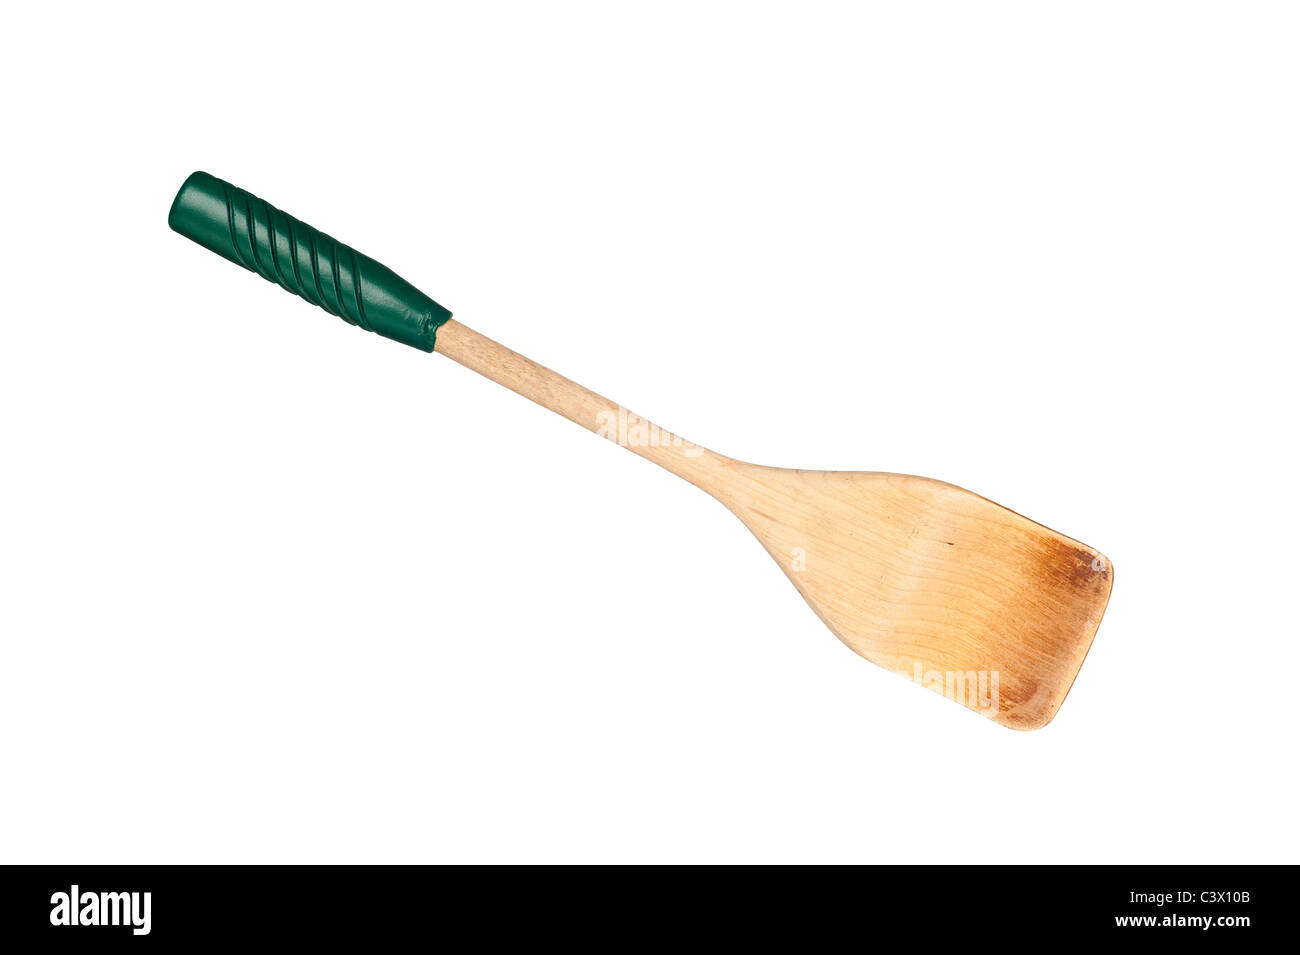 A wooden spatula with green vinyl handle isolated on white Stock Photo